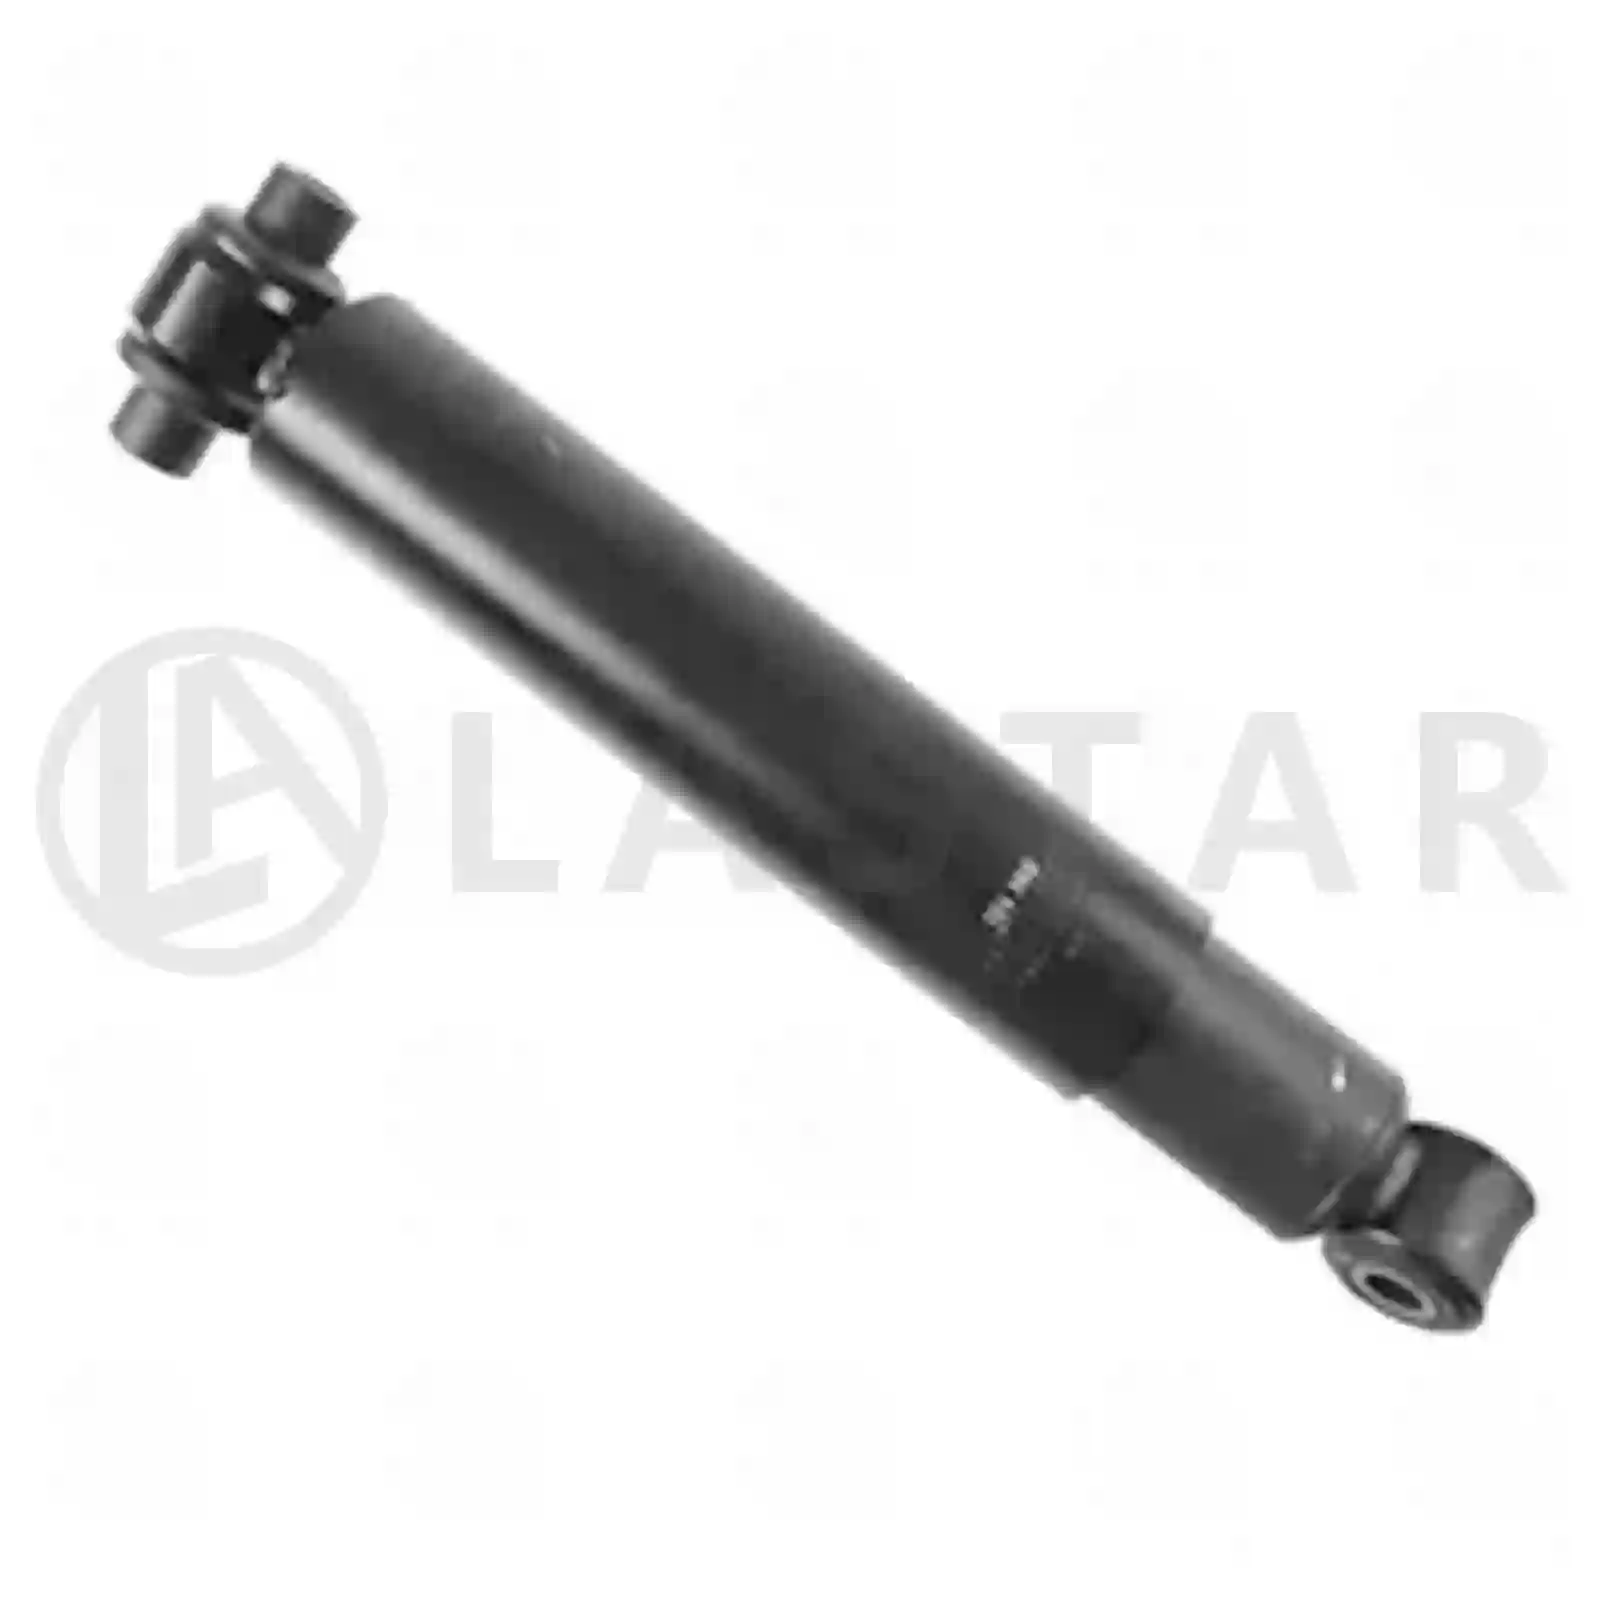 Shock absorber, 77727825, 0053261200, ZG41586-0008, , , ||  77727825 Lastar Spare Part | Truck Spare Parts, Auotomotive Spare Parts Shock absorber, 77727825, 0053261200, ZG41586-0008, , , ||  77727825 Lastar Spare Part | Truck Spare Parts, Auotomotive Spare Parts